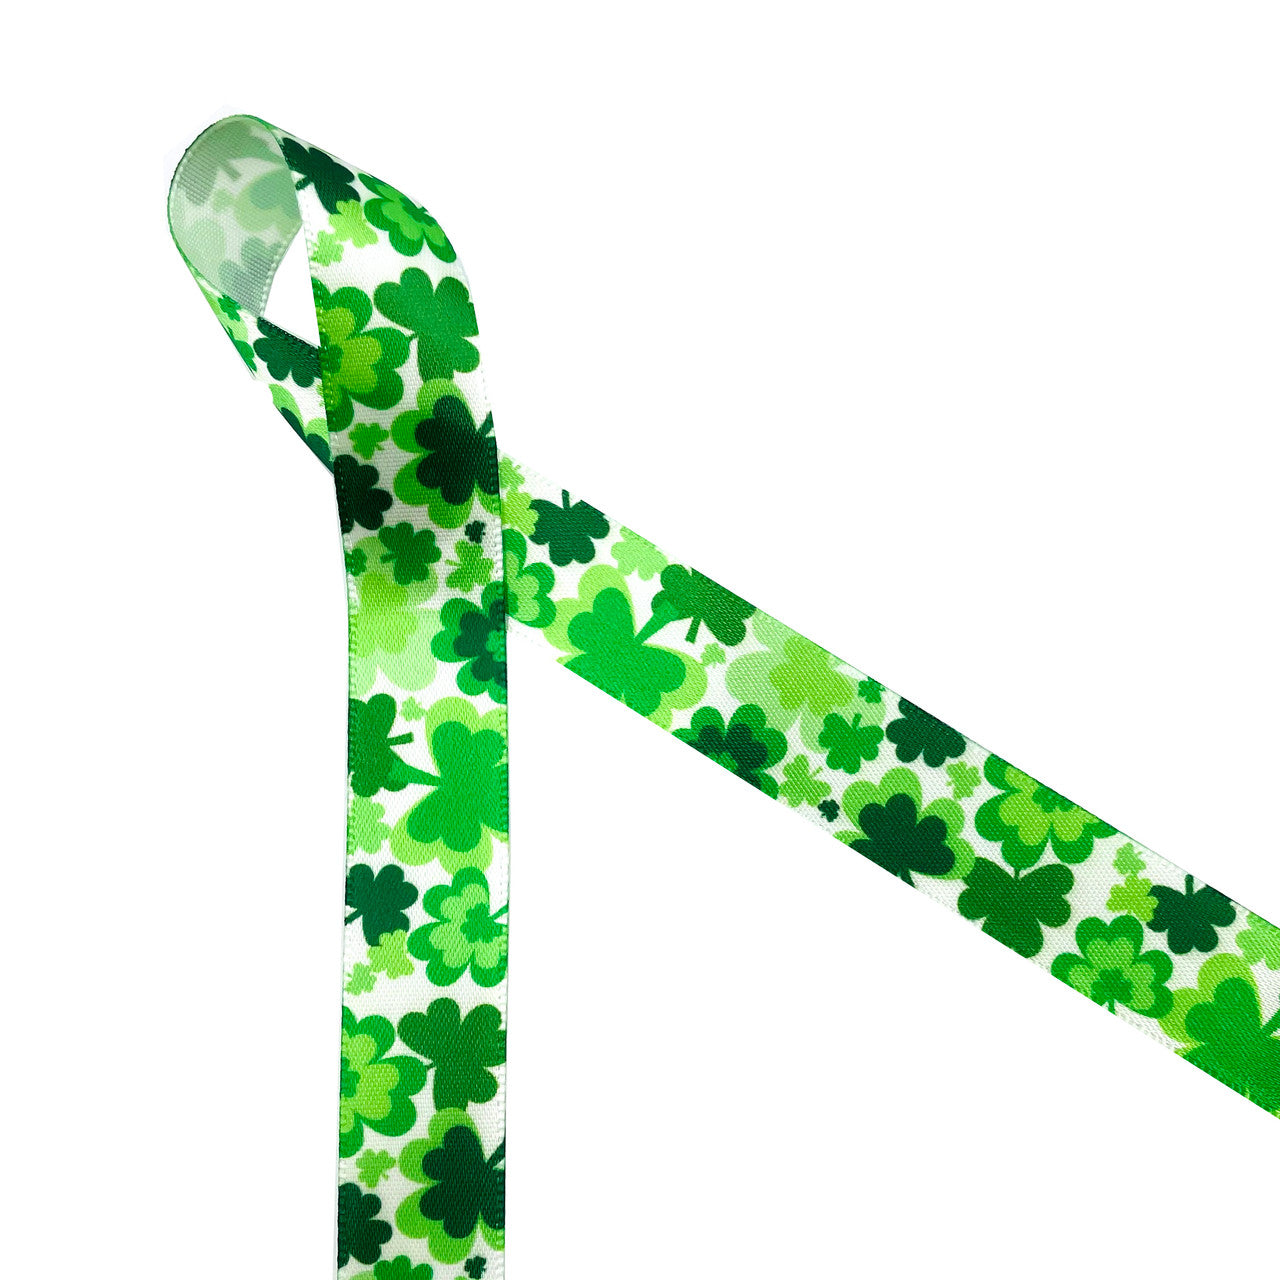 Our tossed shamrocks in multiple shades of green on 5/8" white single face satin ribbon will make all your St. Patrick's favors and treats pop with the wearn' of the green! Use this ribbon for party favors, gift wrap, gift baskets, party decor , cookies and sweet treats Designed and printed in the USA